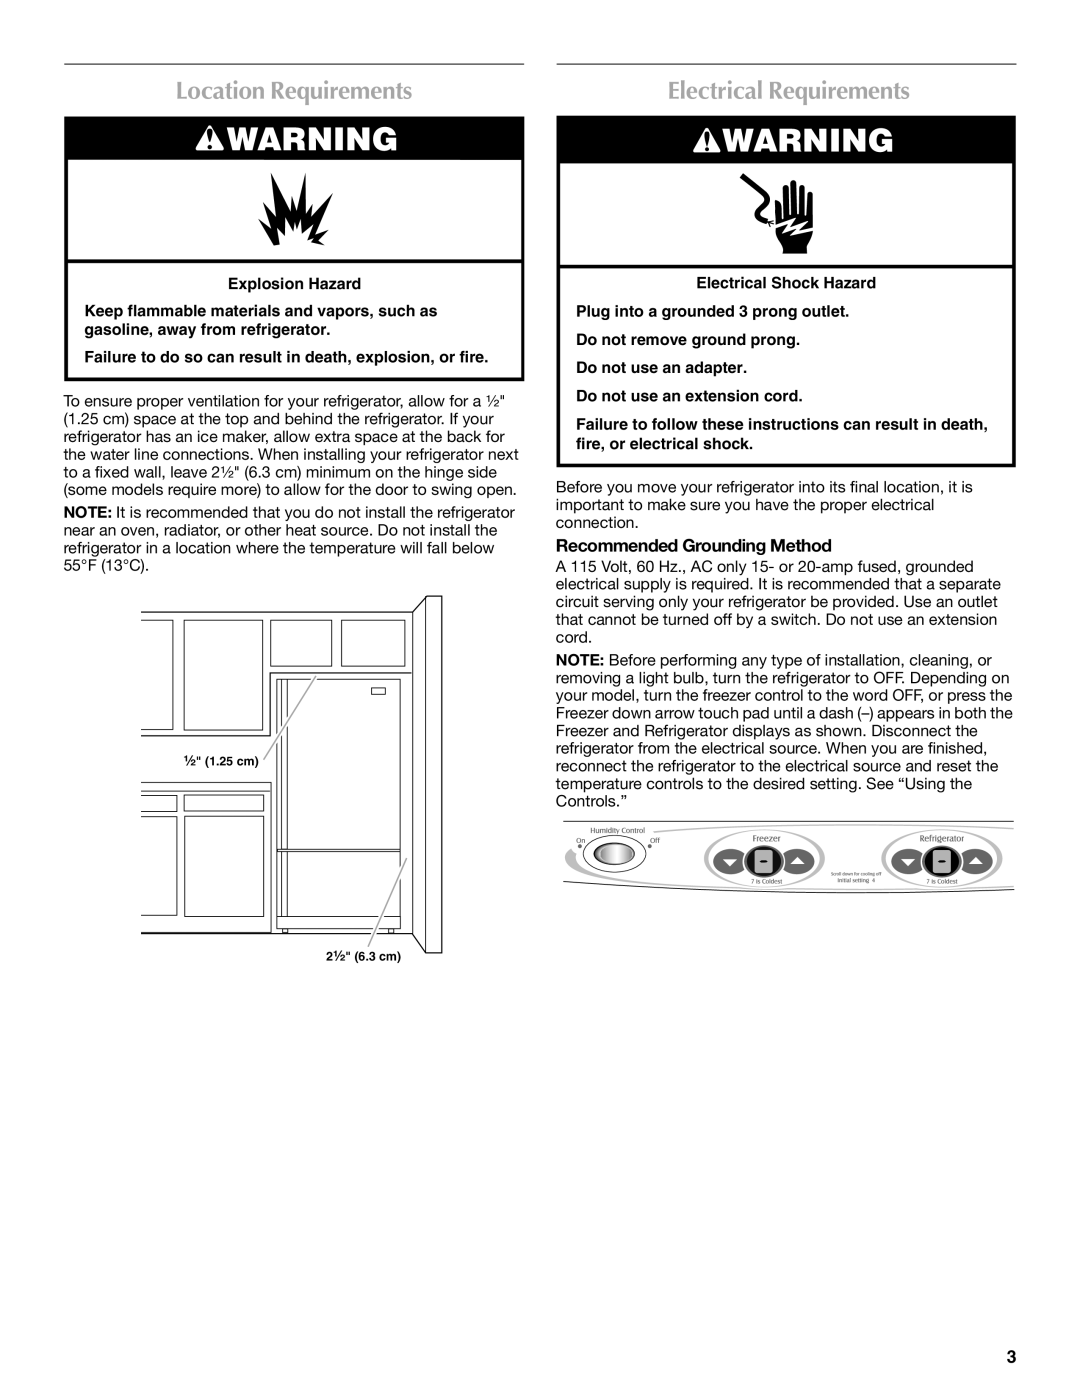 Maytag W10175446B manual Location Requirements, Electrical Requirements, Recommended Grounding Method, Explosion Hazard 